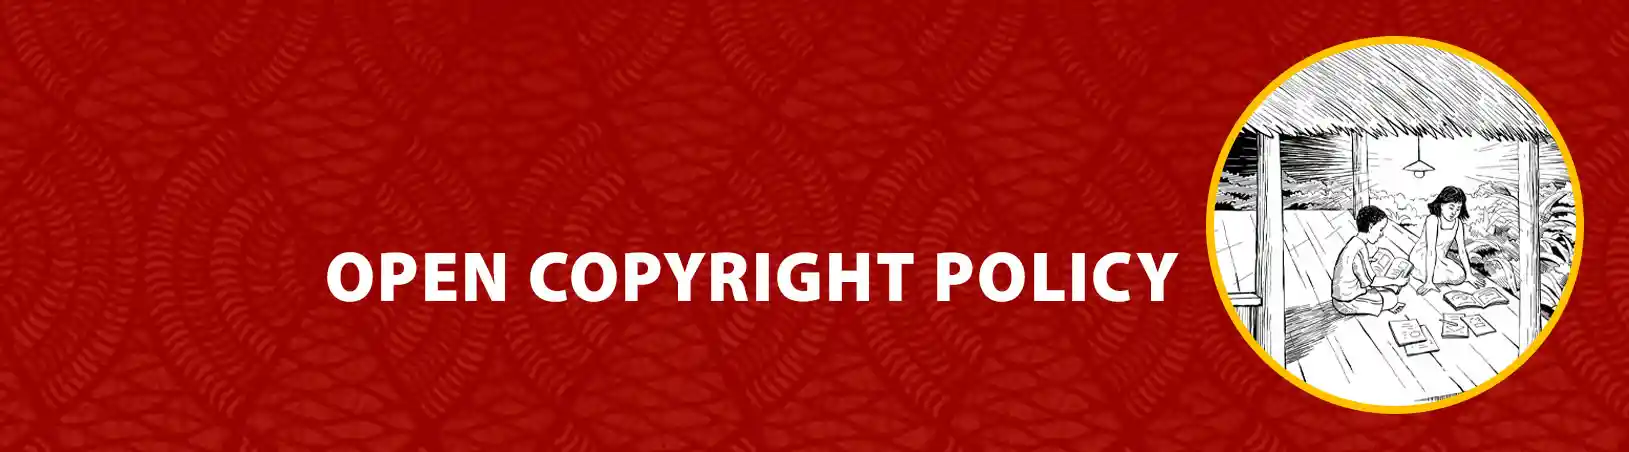 Open Copyright Policy